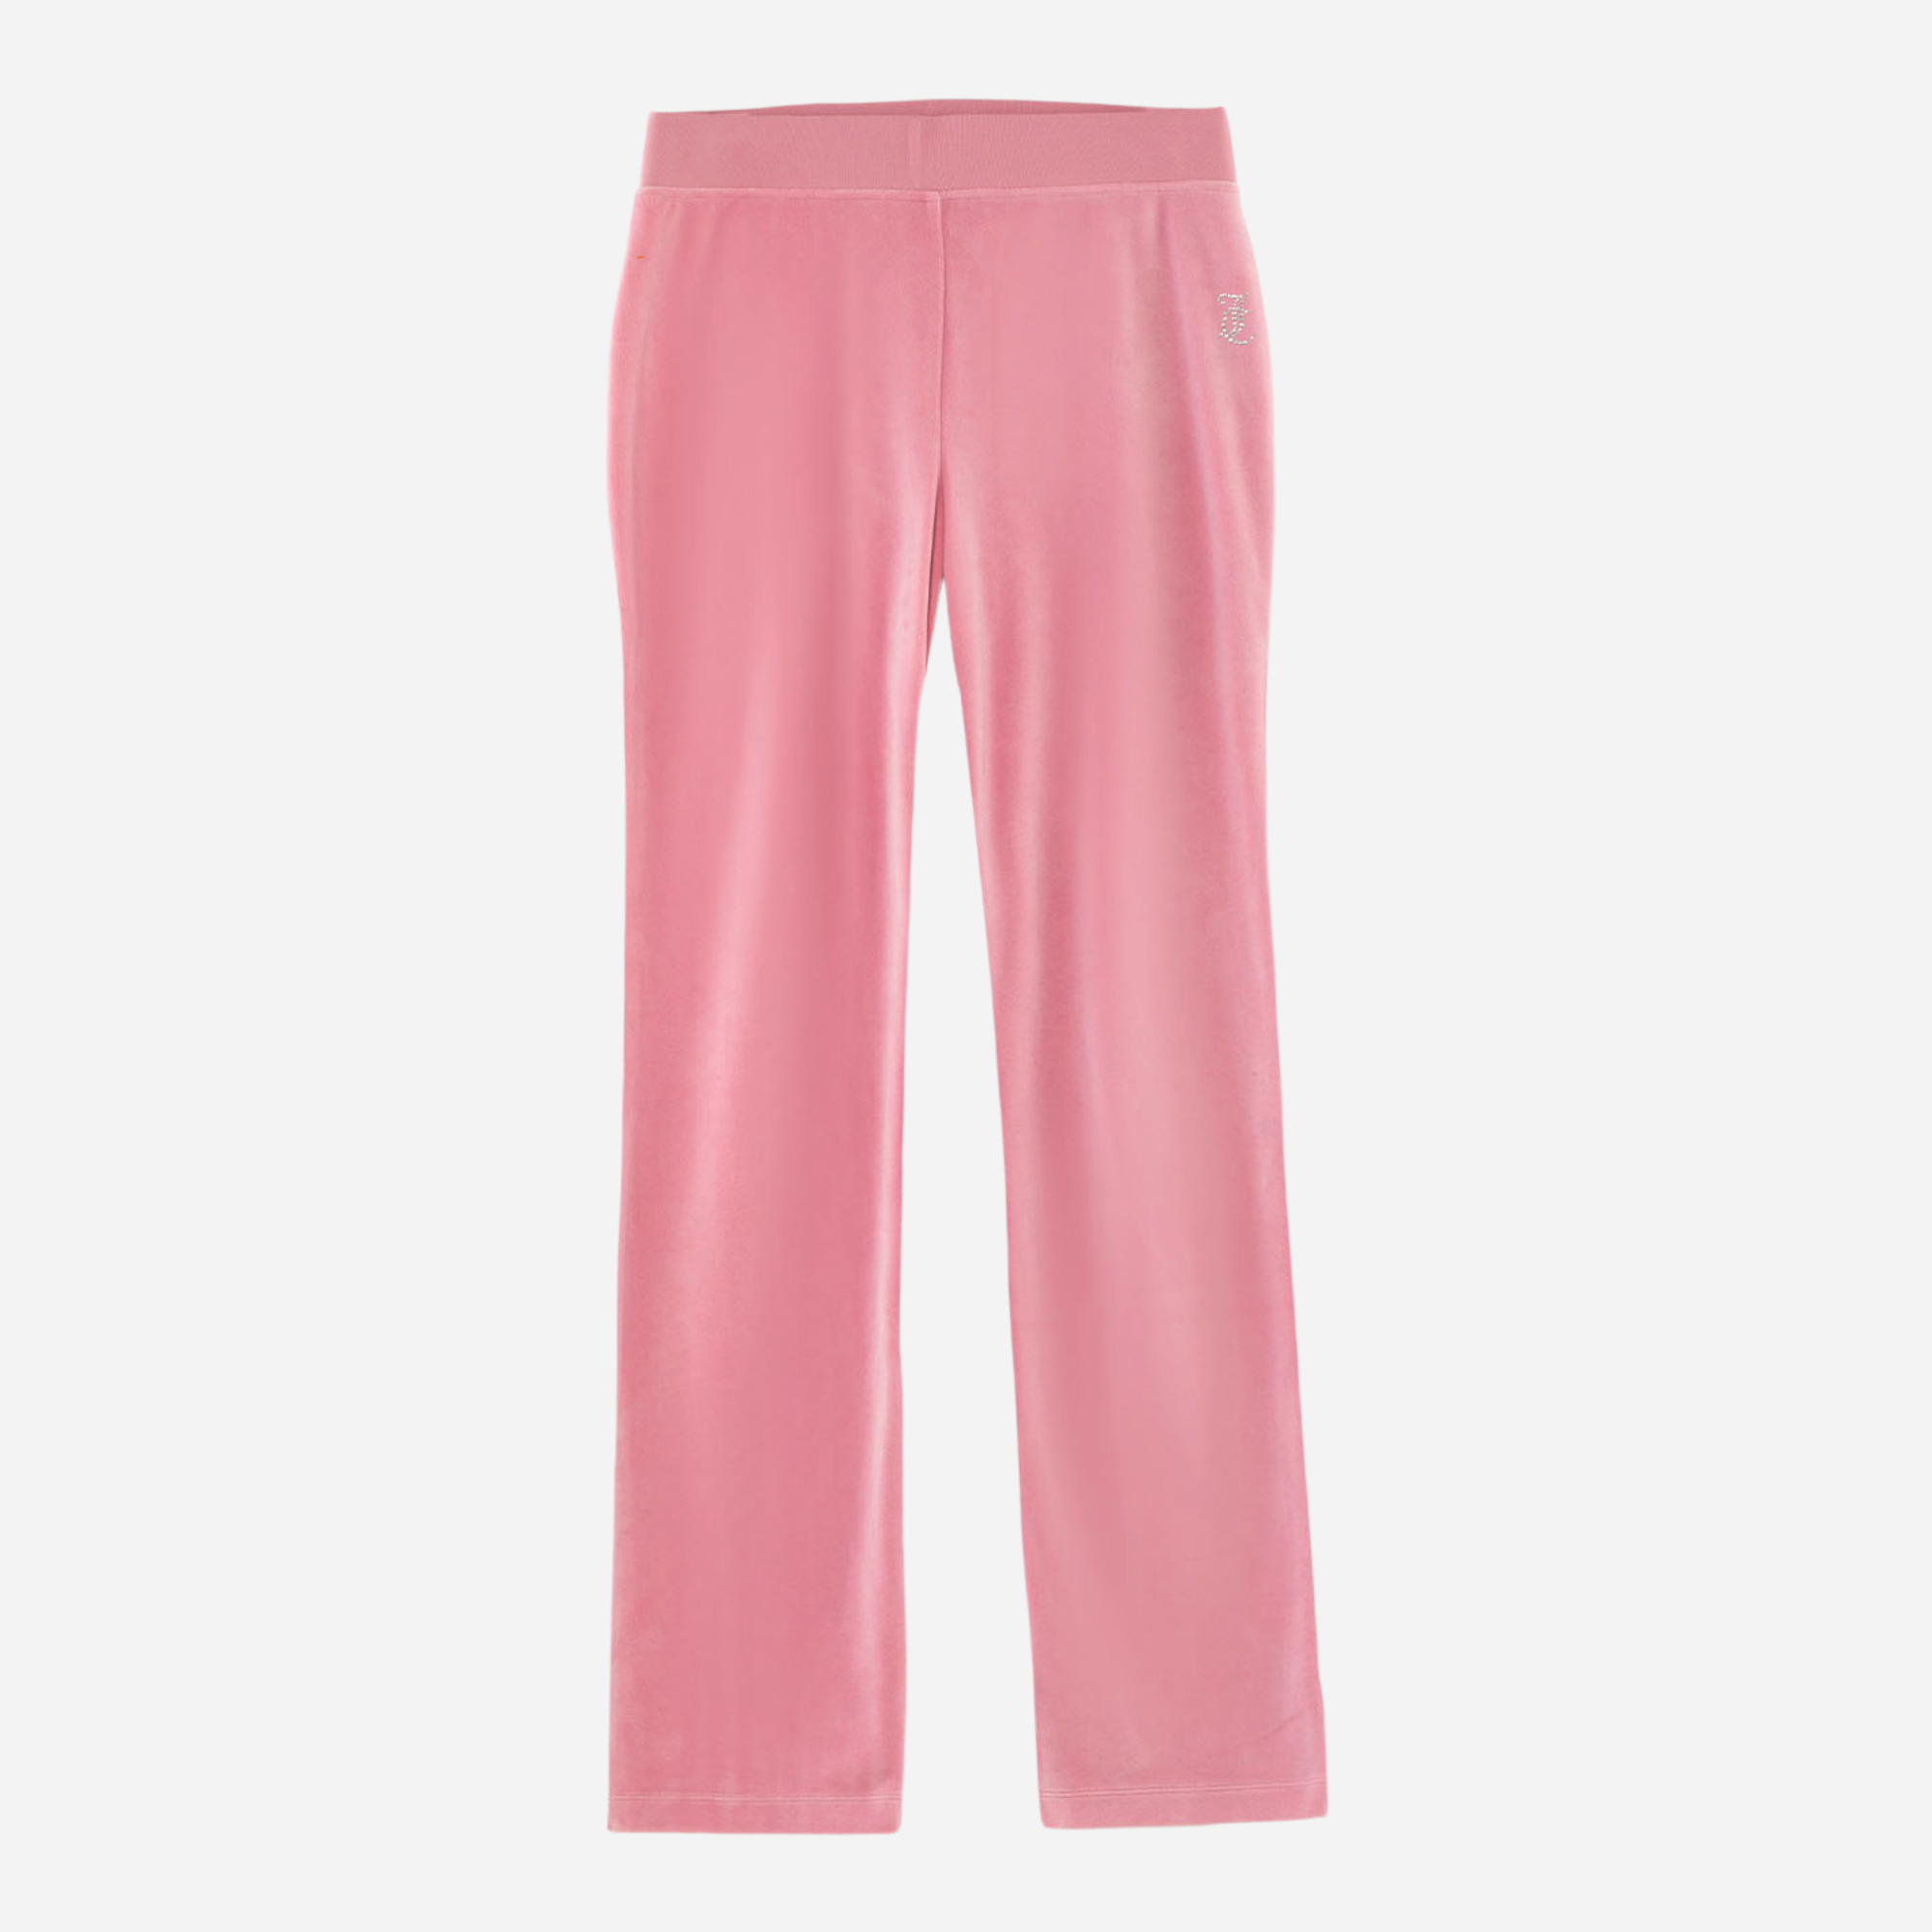 Juicy Couture - OG Big Bling Velour Track Pants FALL 22